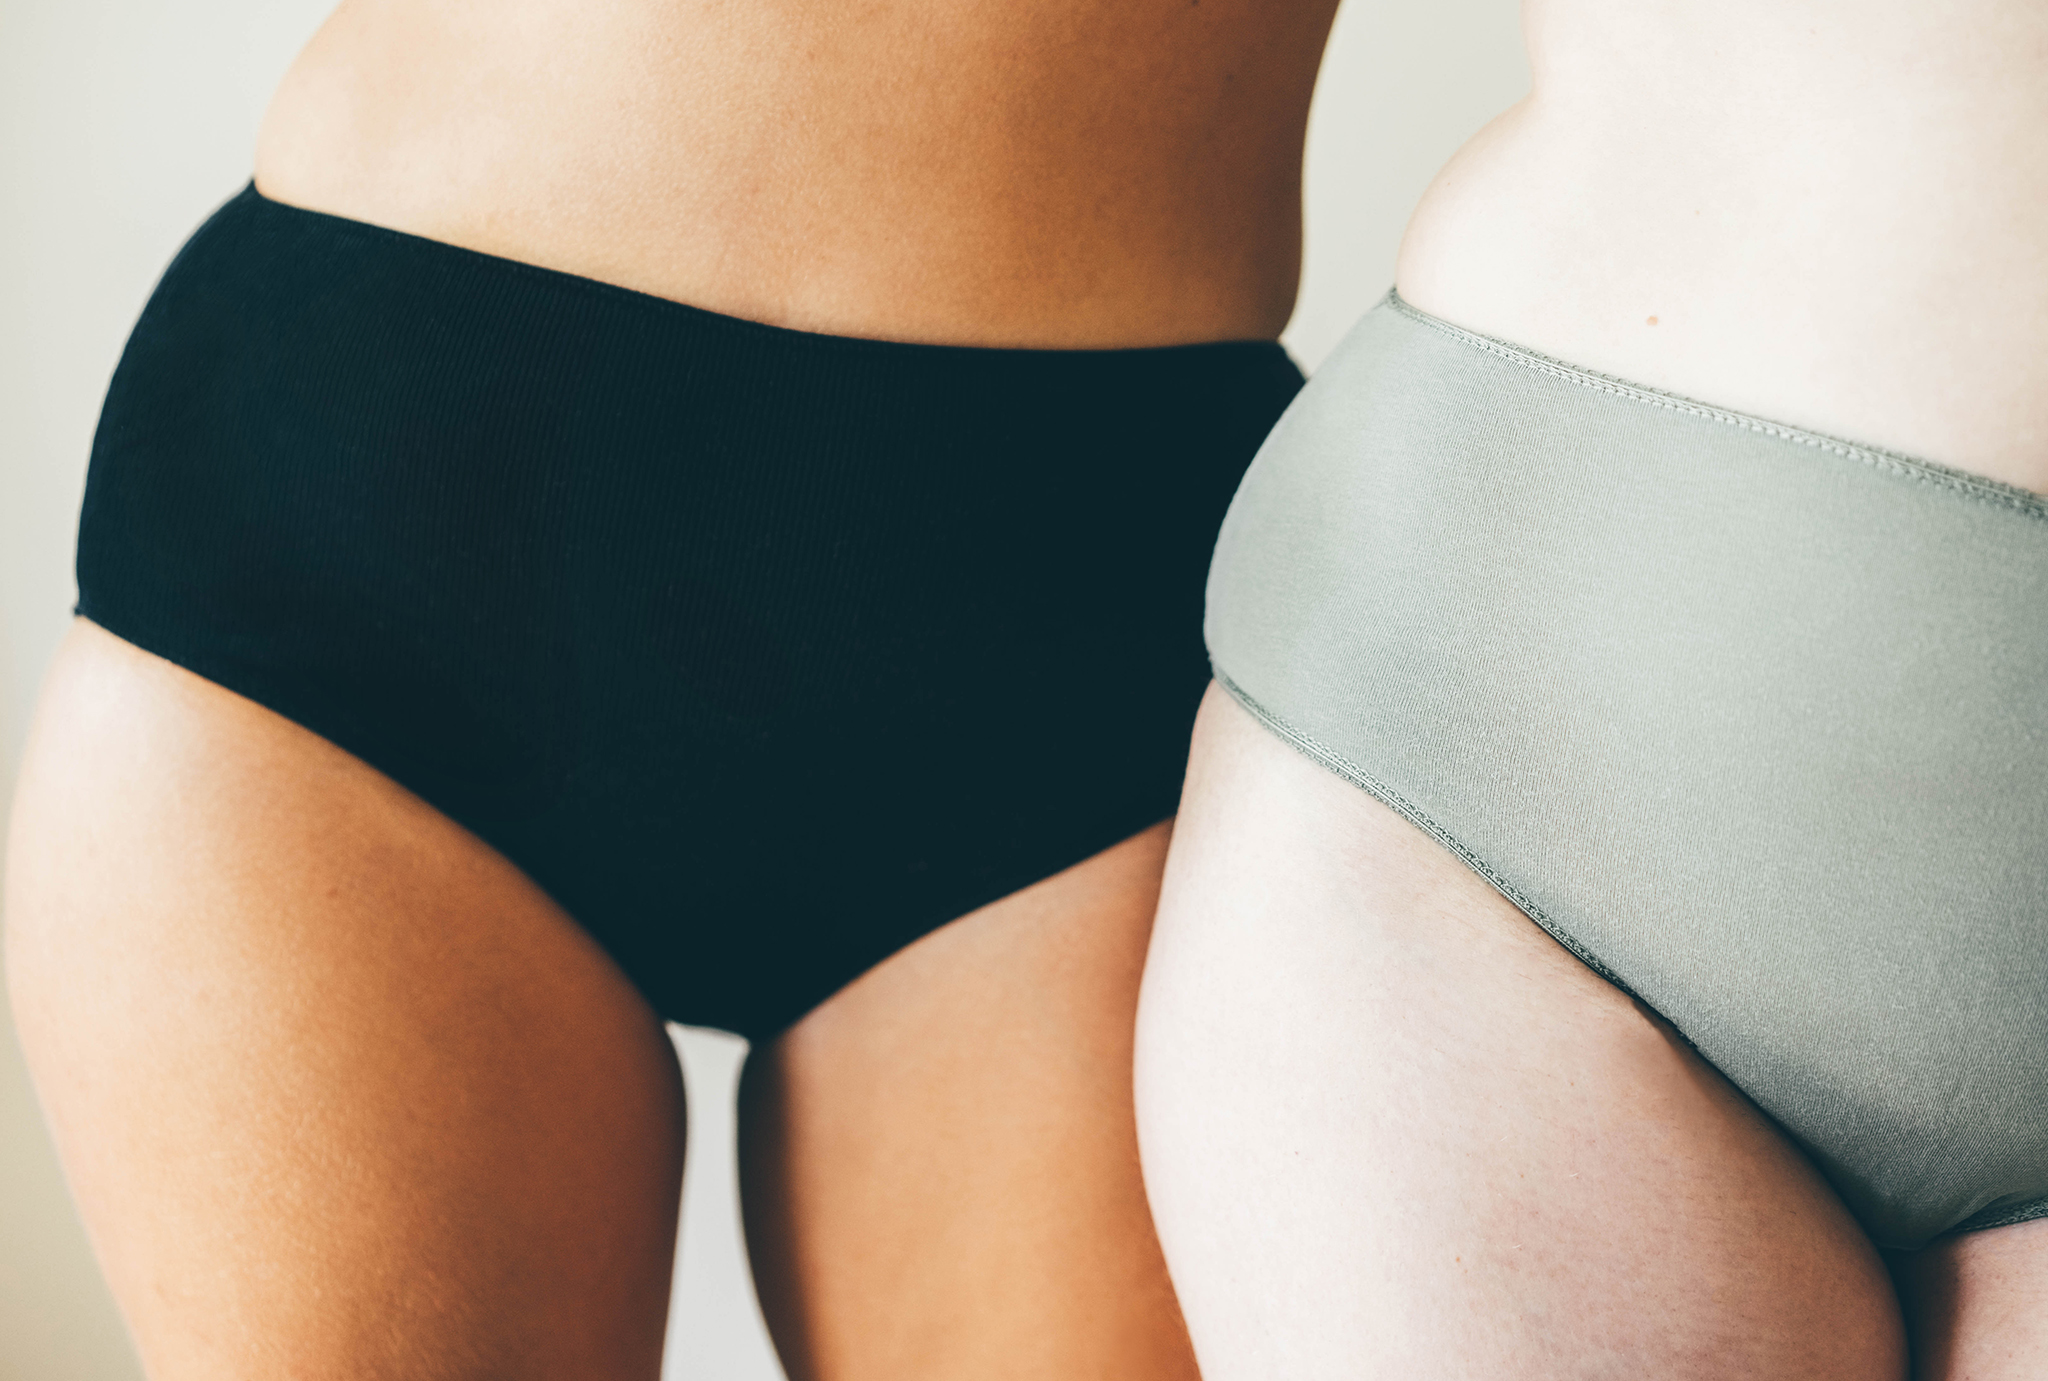 Smart Underwear Help Battle Urinary Incontinence - Patient Care -  mobile.